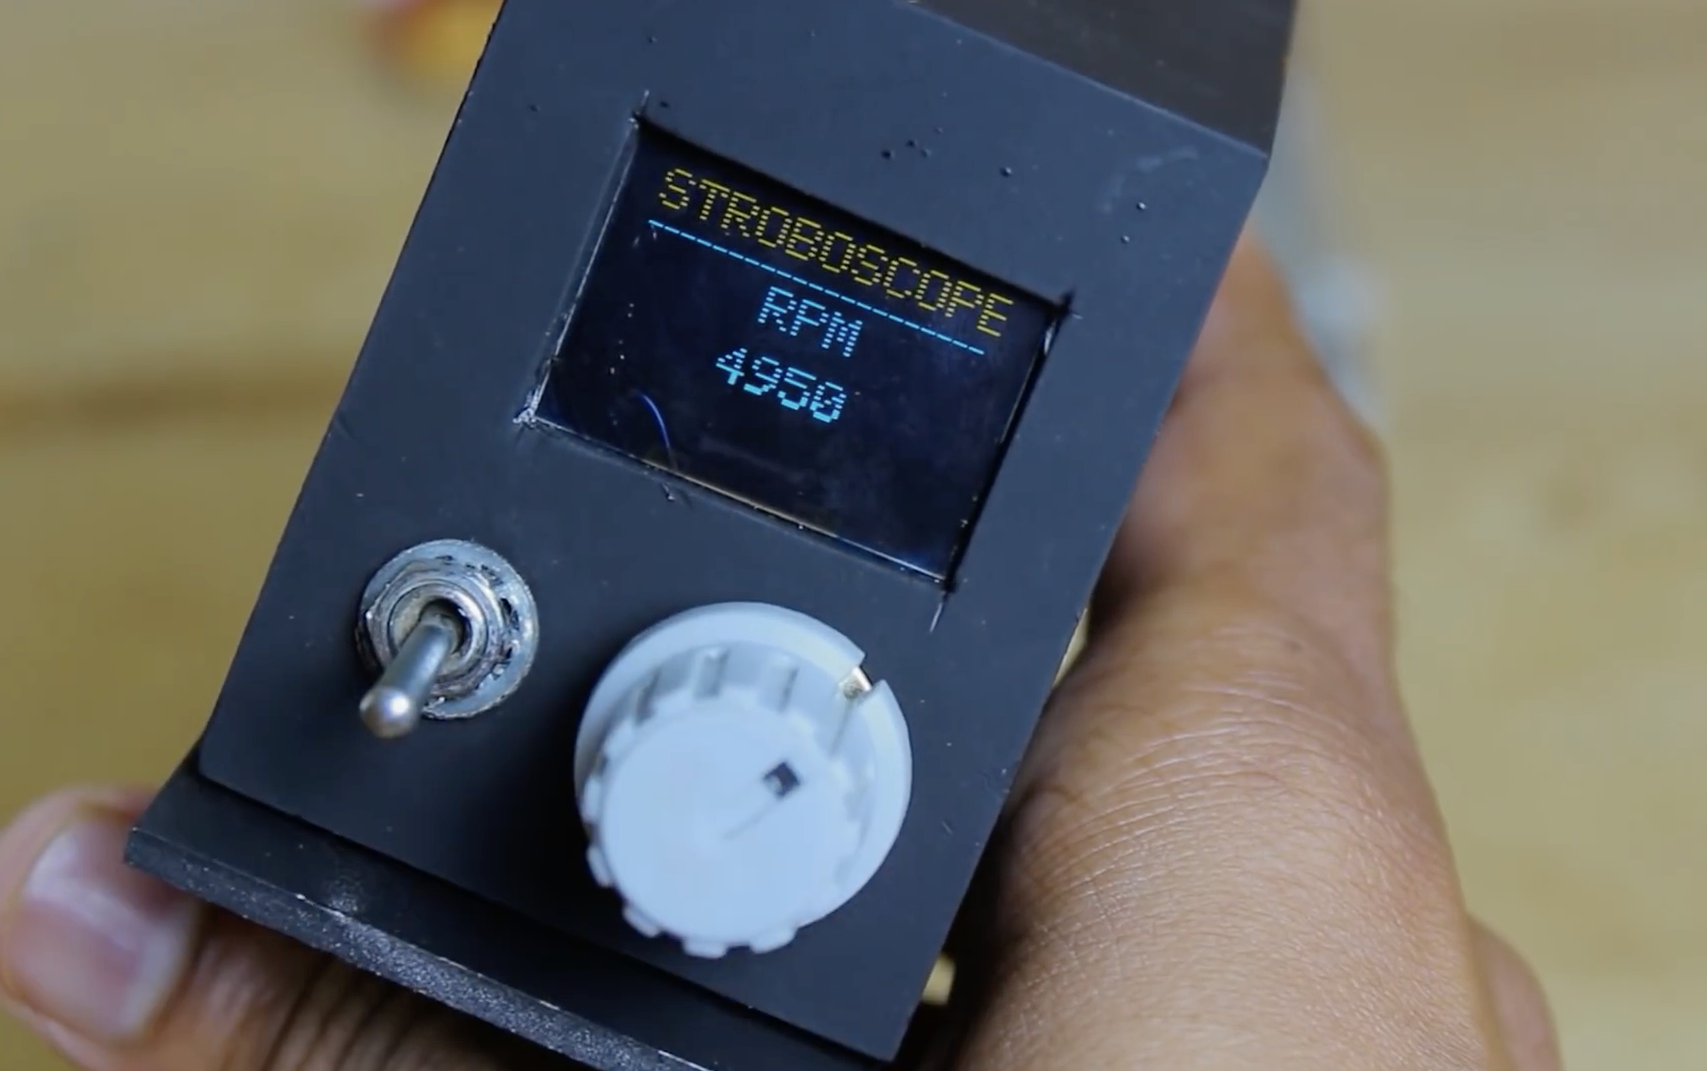 Make Your Own LED Stroboscope : 6 Steps (with Pictures) - Instructables